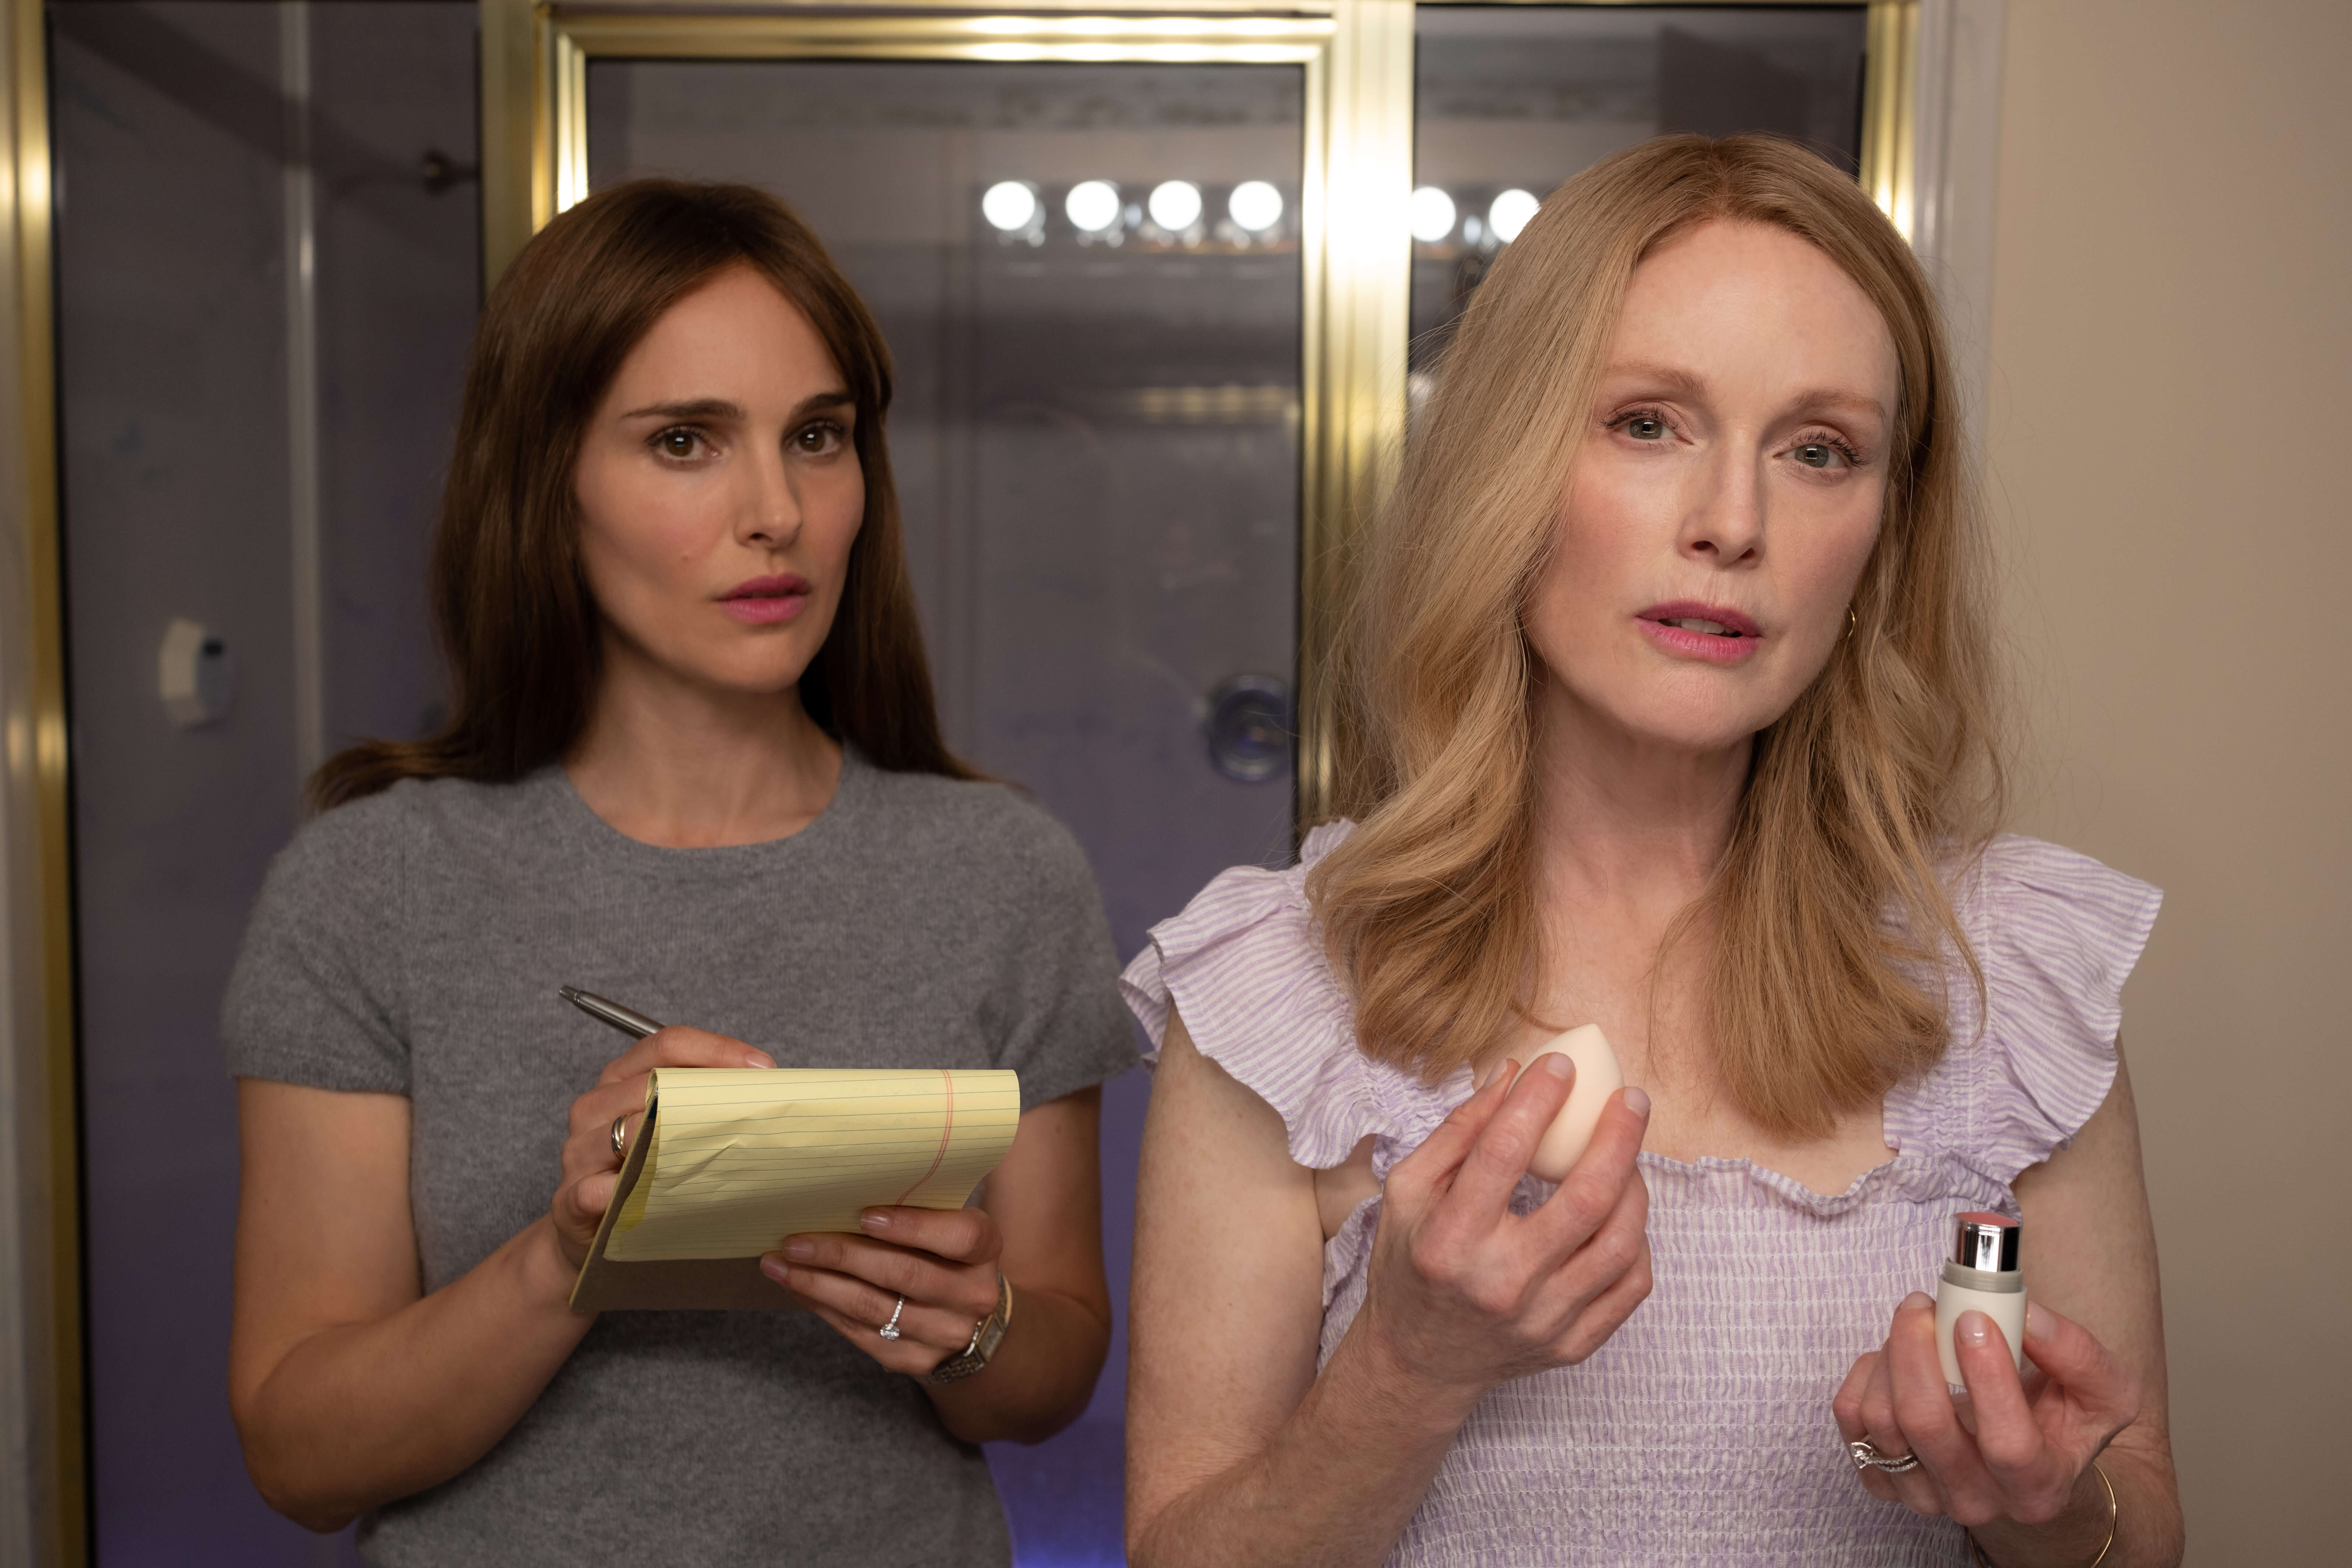 May December. (L to R) Natalie Portman as Elizabeth Berry and Julianne Moore as Gracie Atherton-Yoo in May December. Cr. Francois Duhamel / courtesy of Netflix